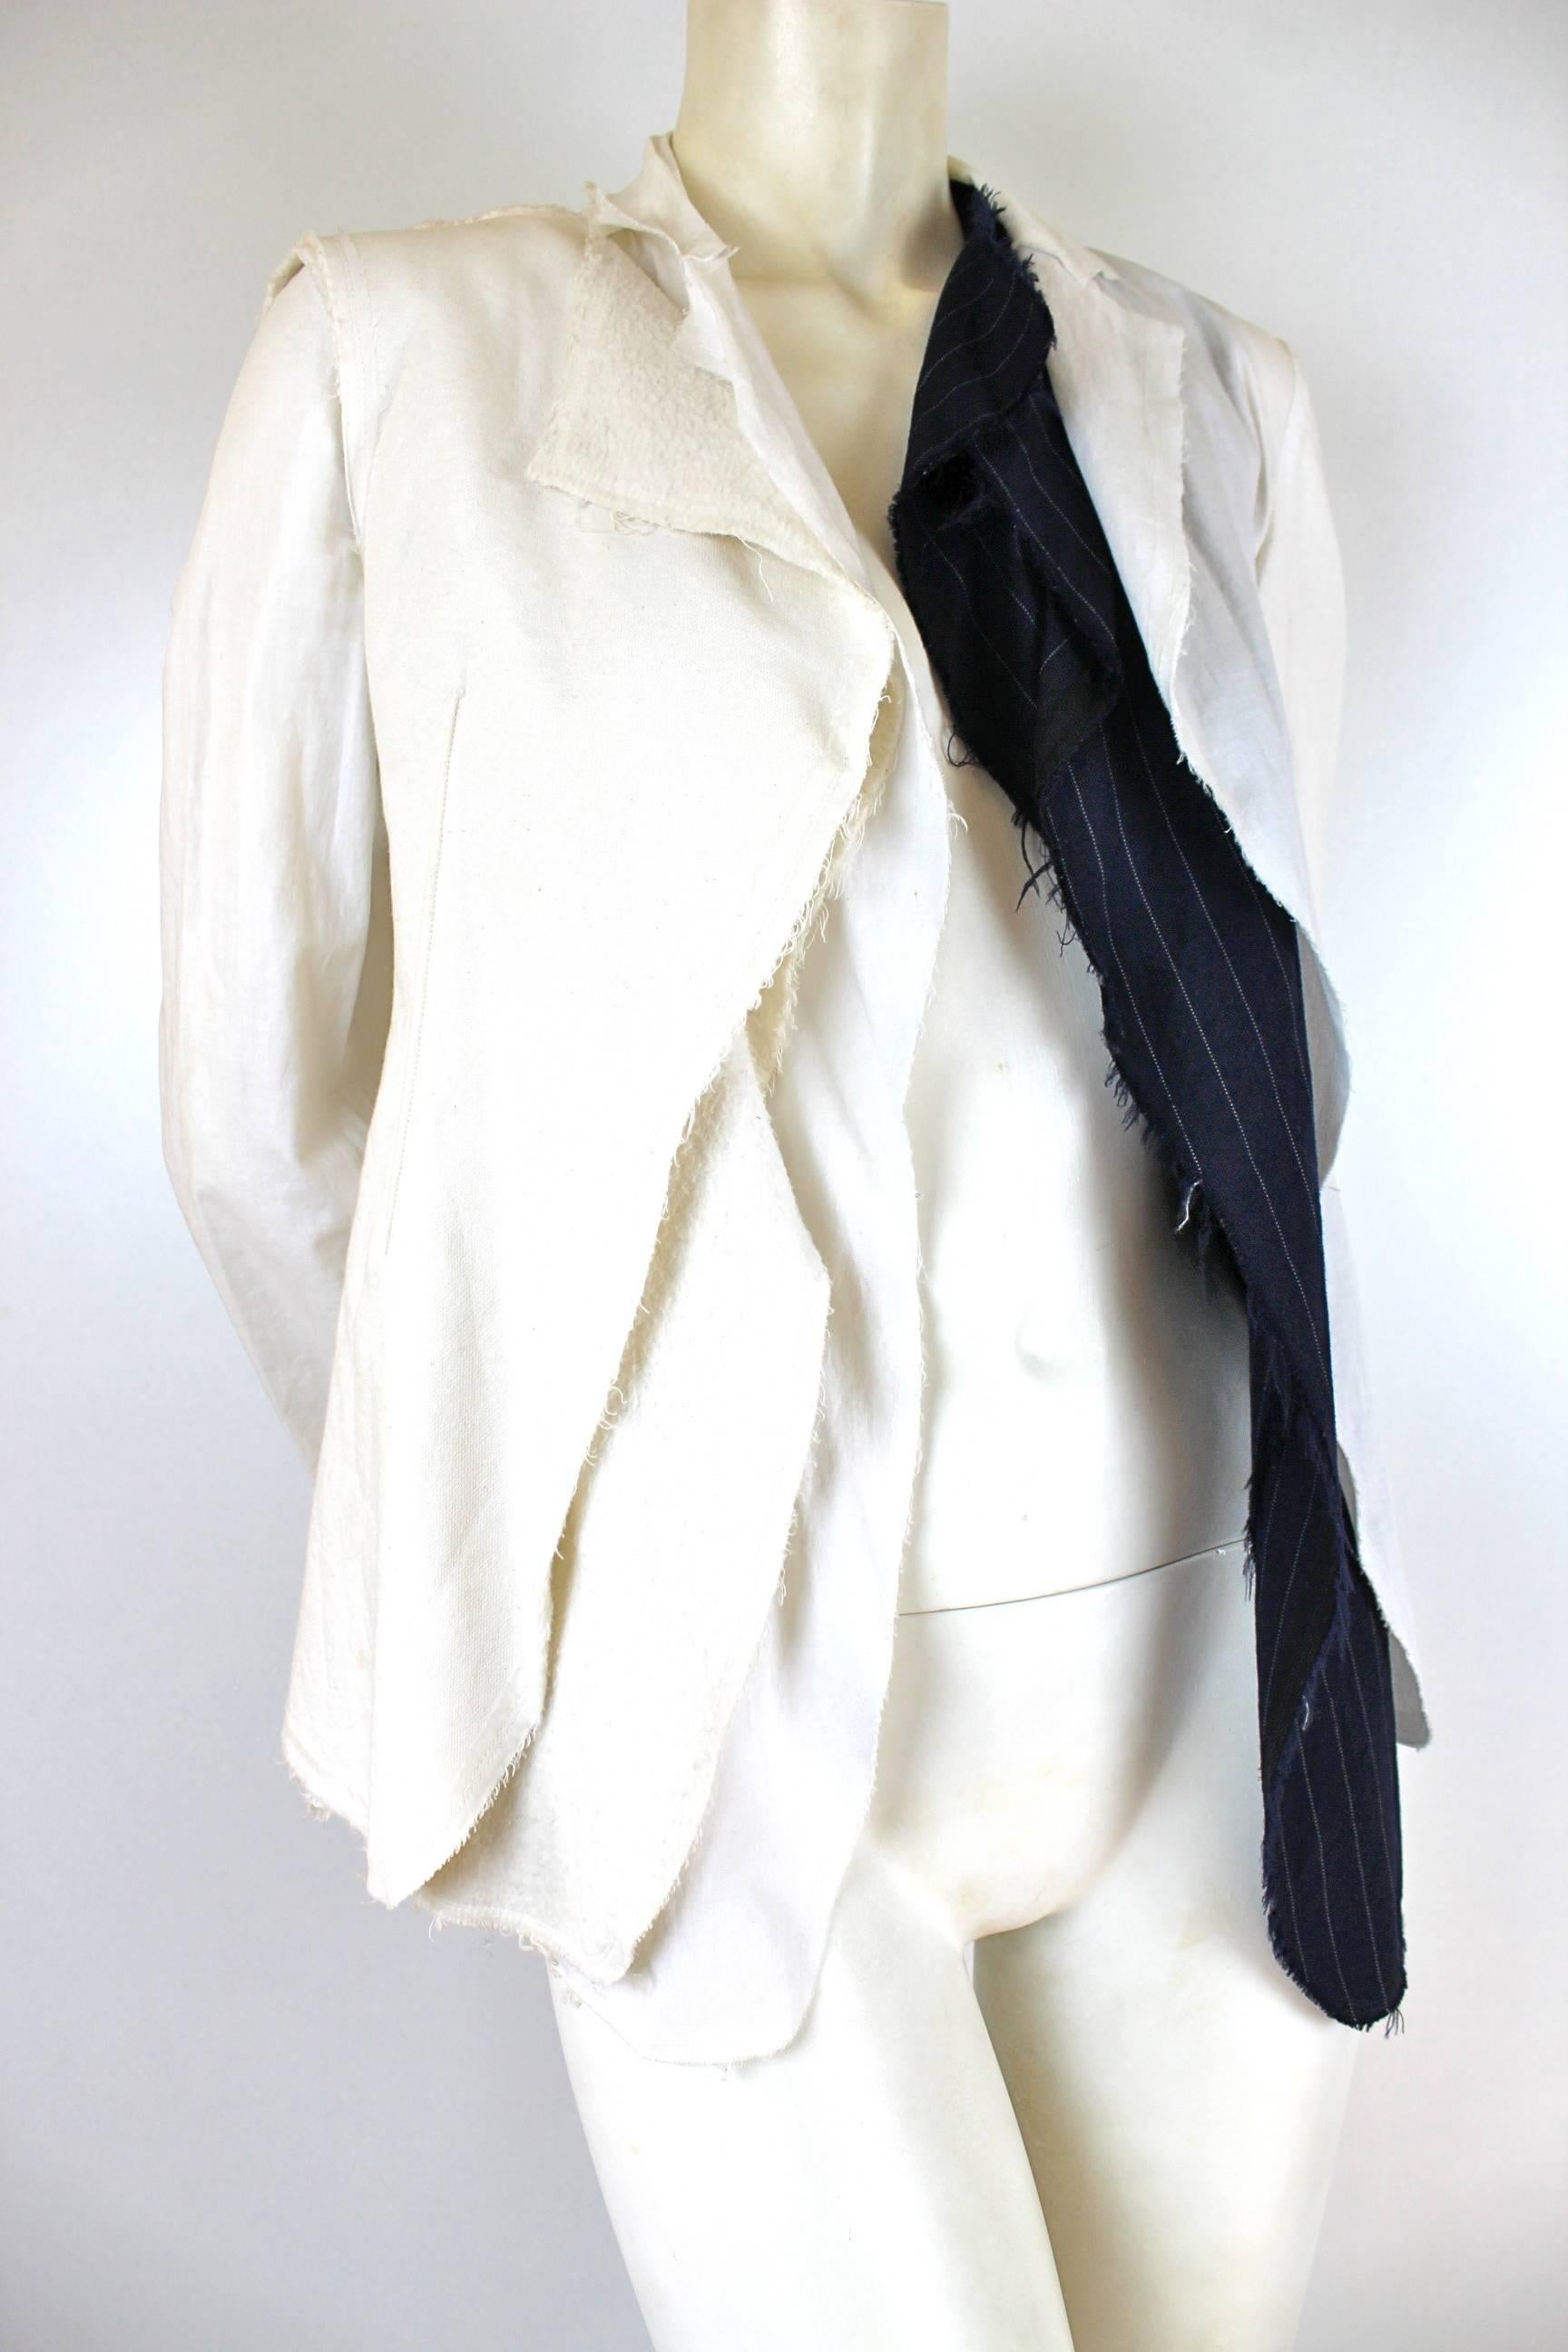 Comme des Garcons Ad 2002 Runway Jacket
Very unusual construction even for CDG
White cotton jacket with wool pinstripe suiting and exposed interfacing 
Labelled size M